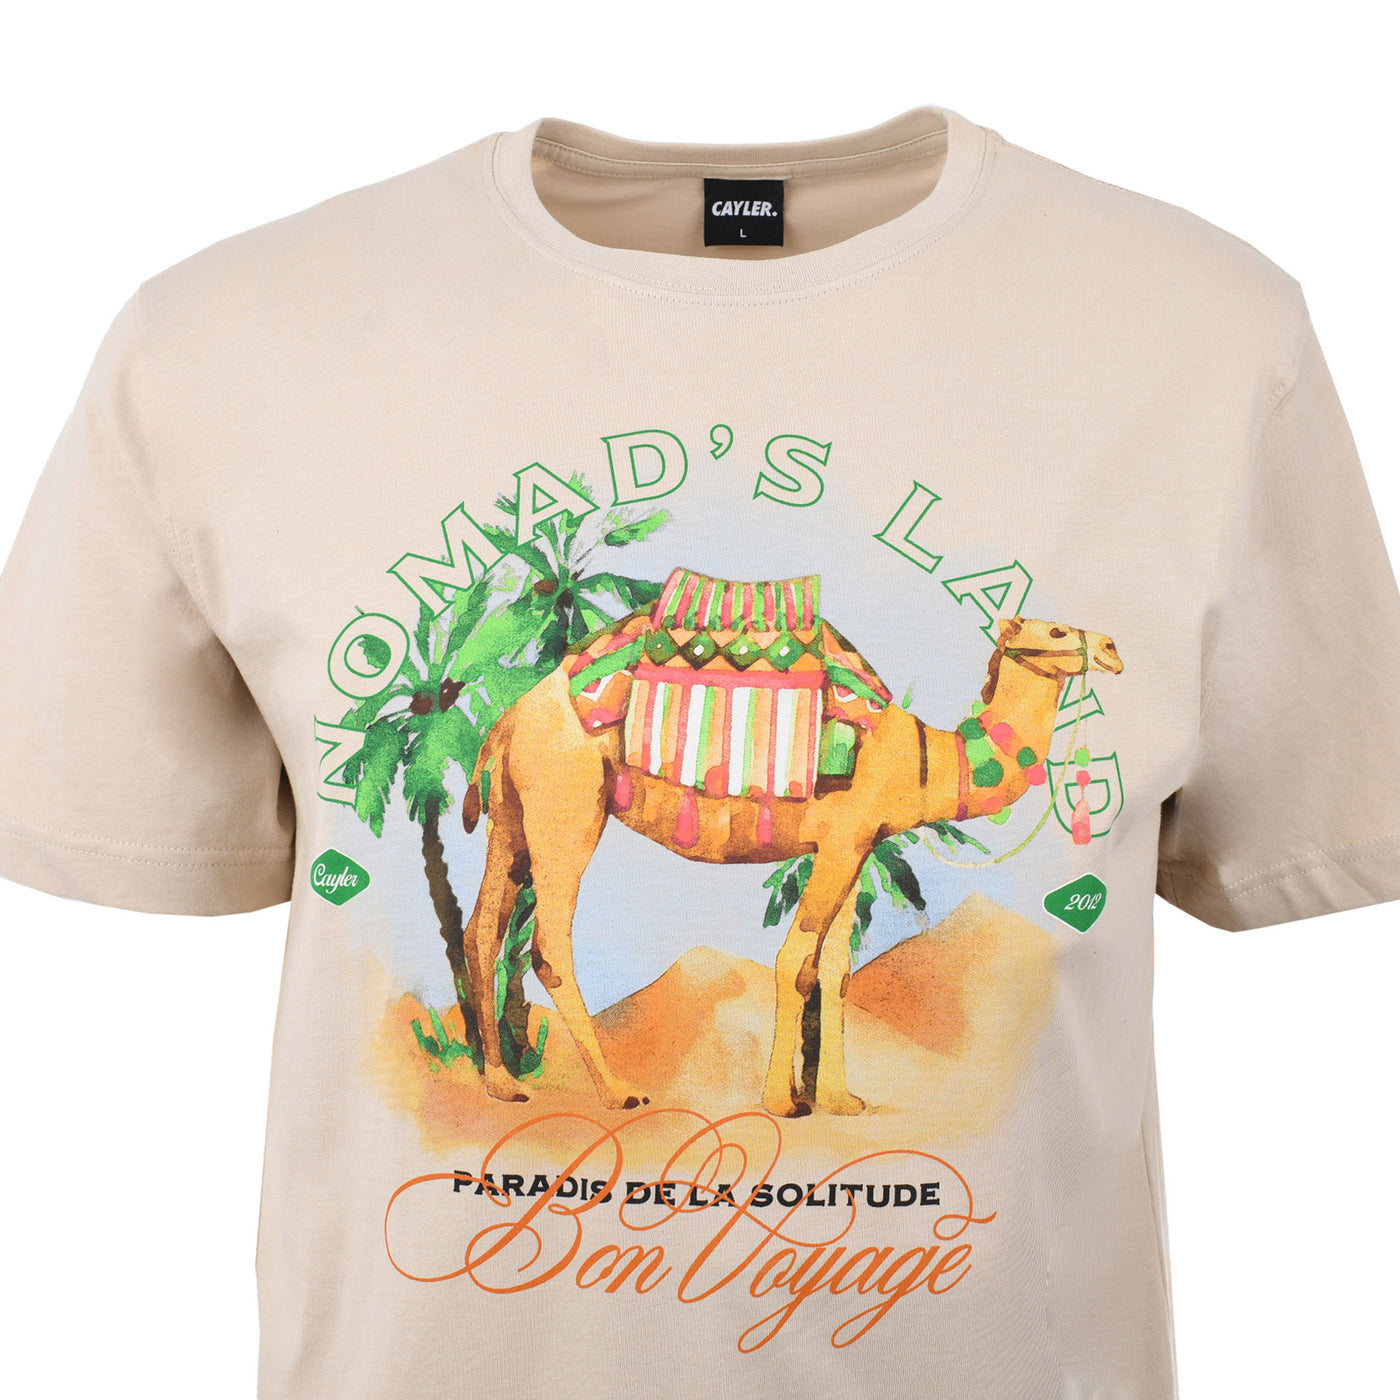 Camel Graphic T-shirt